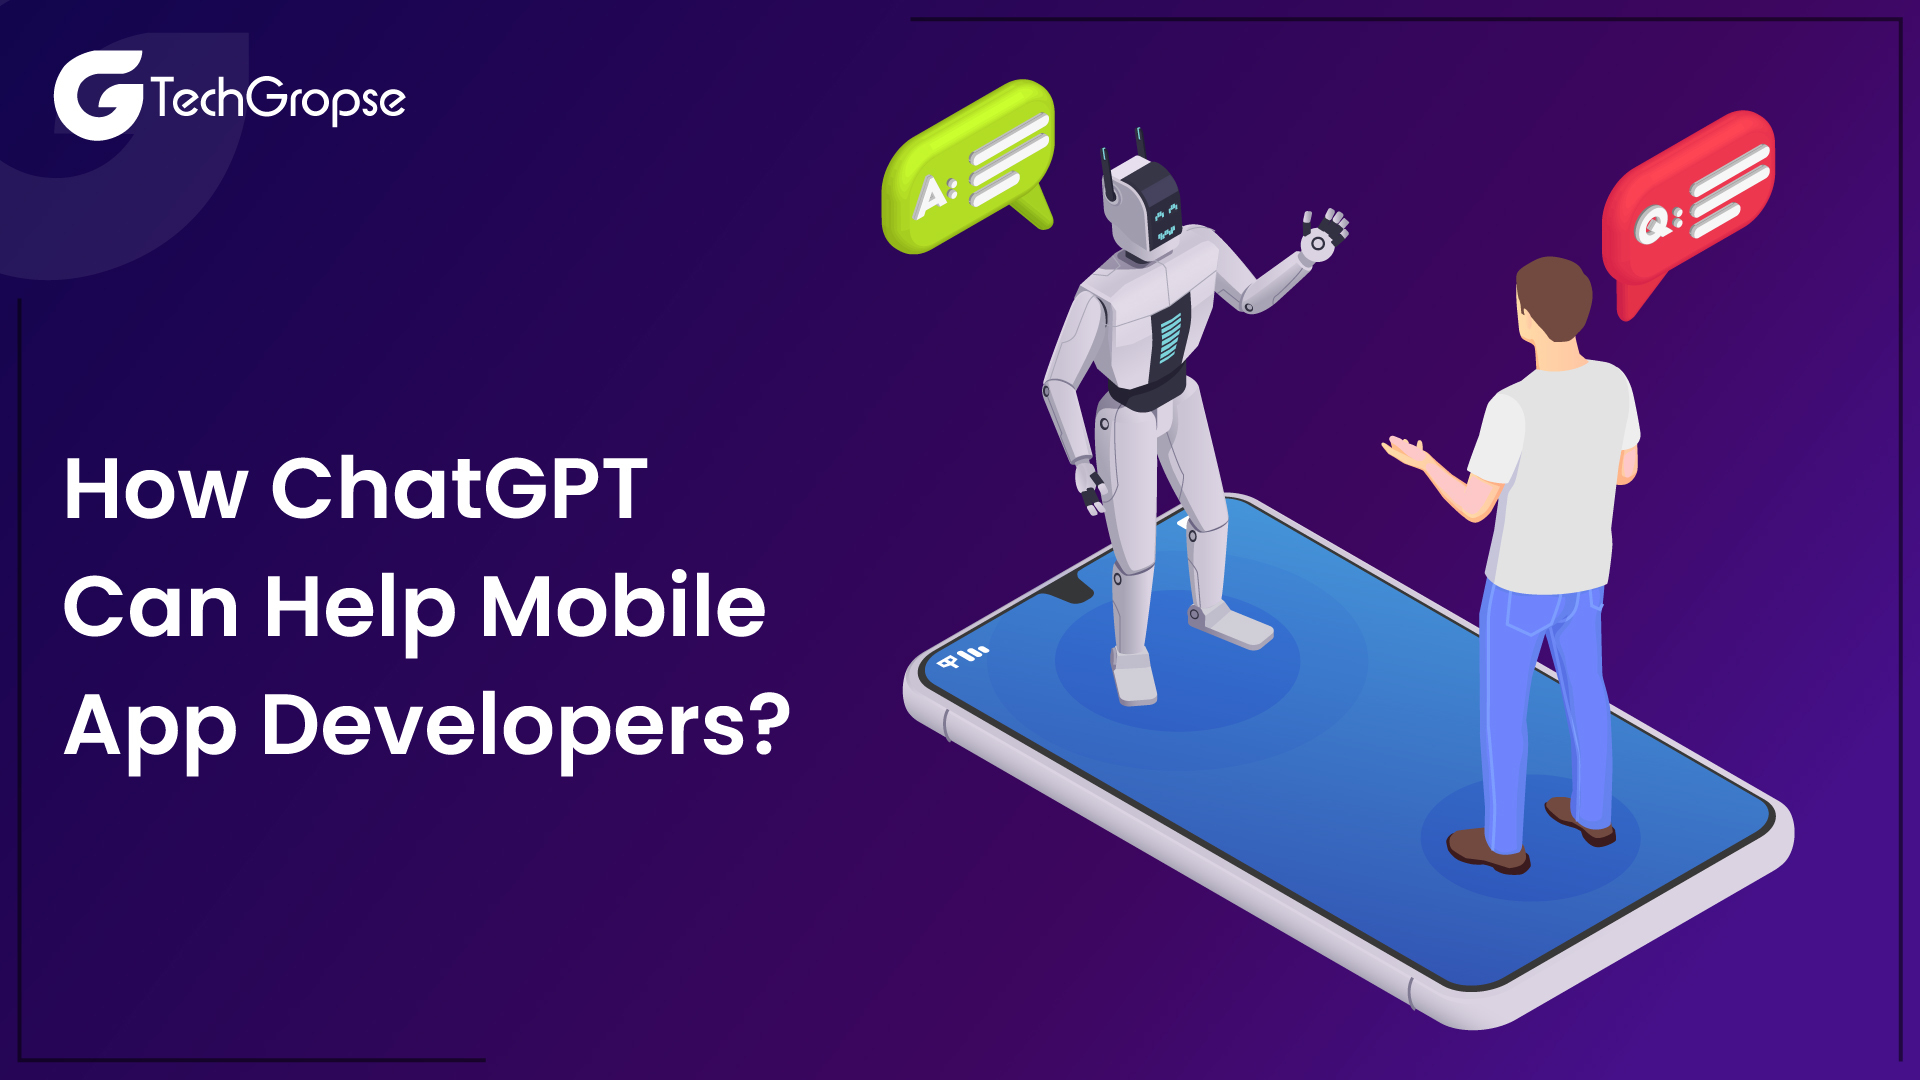 How Can ChatGPT Help Mobile App Developers?